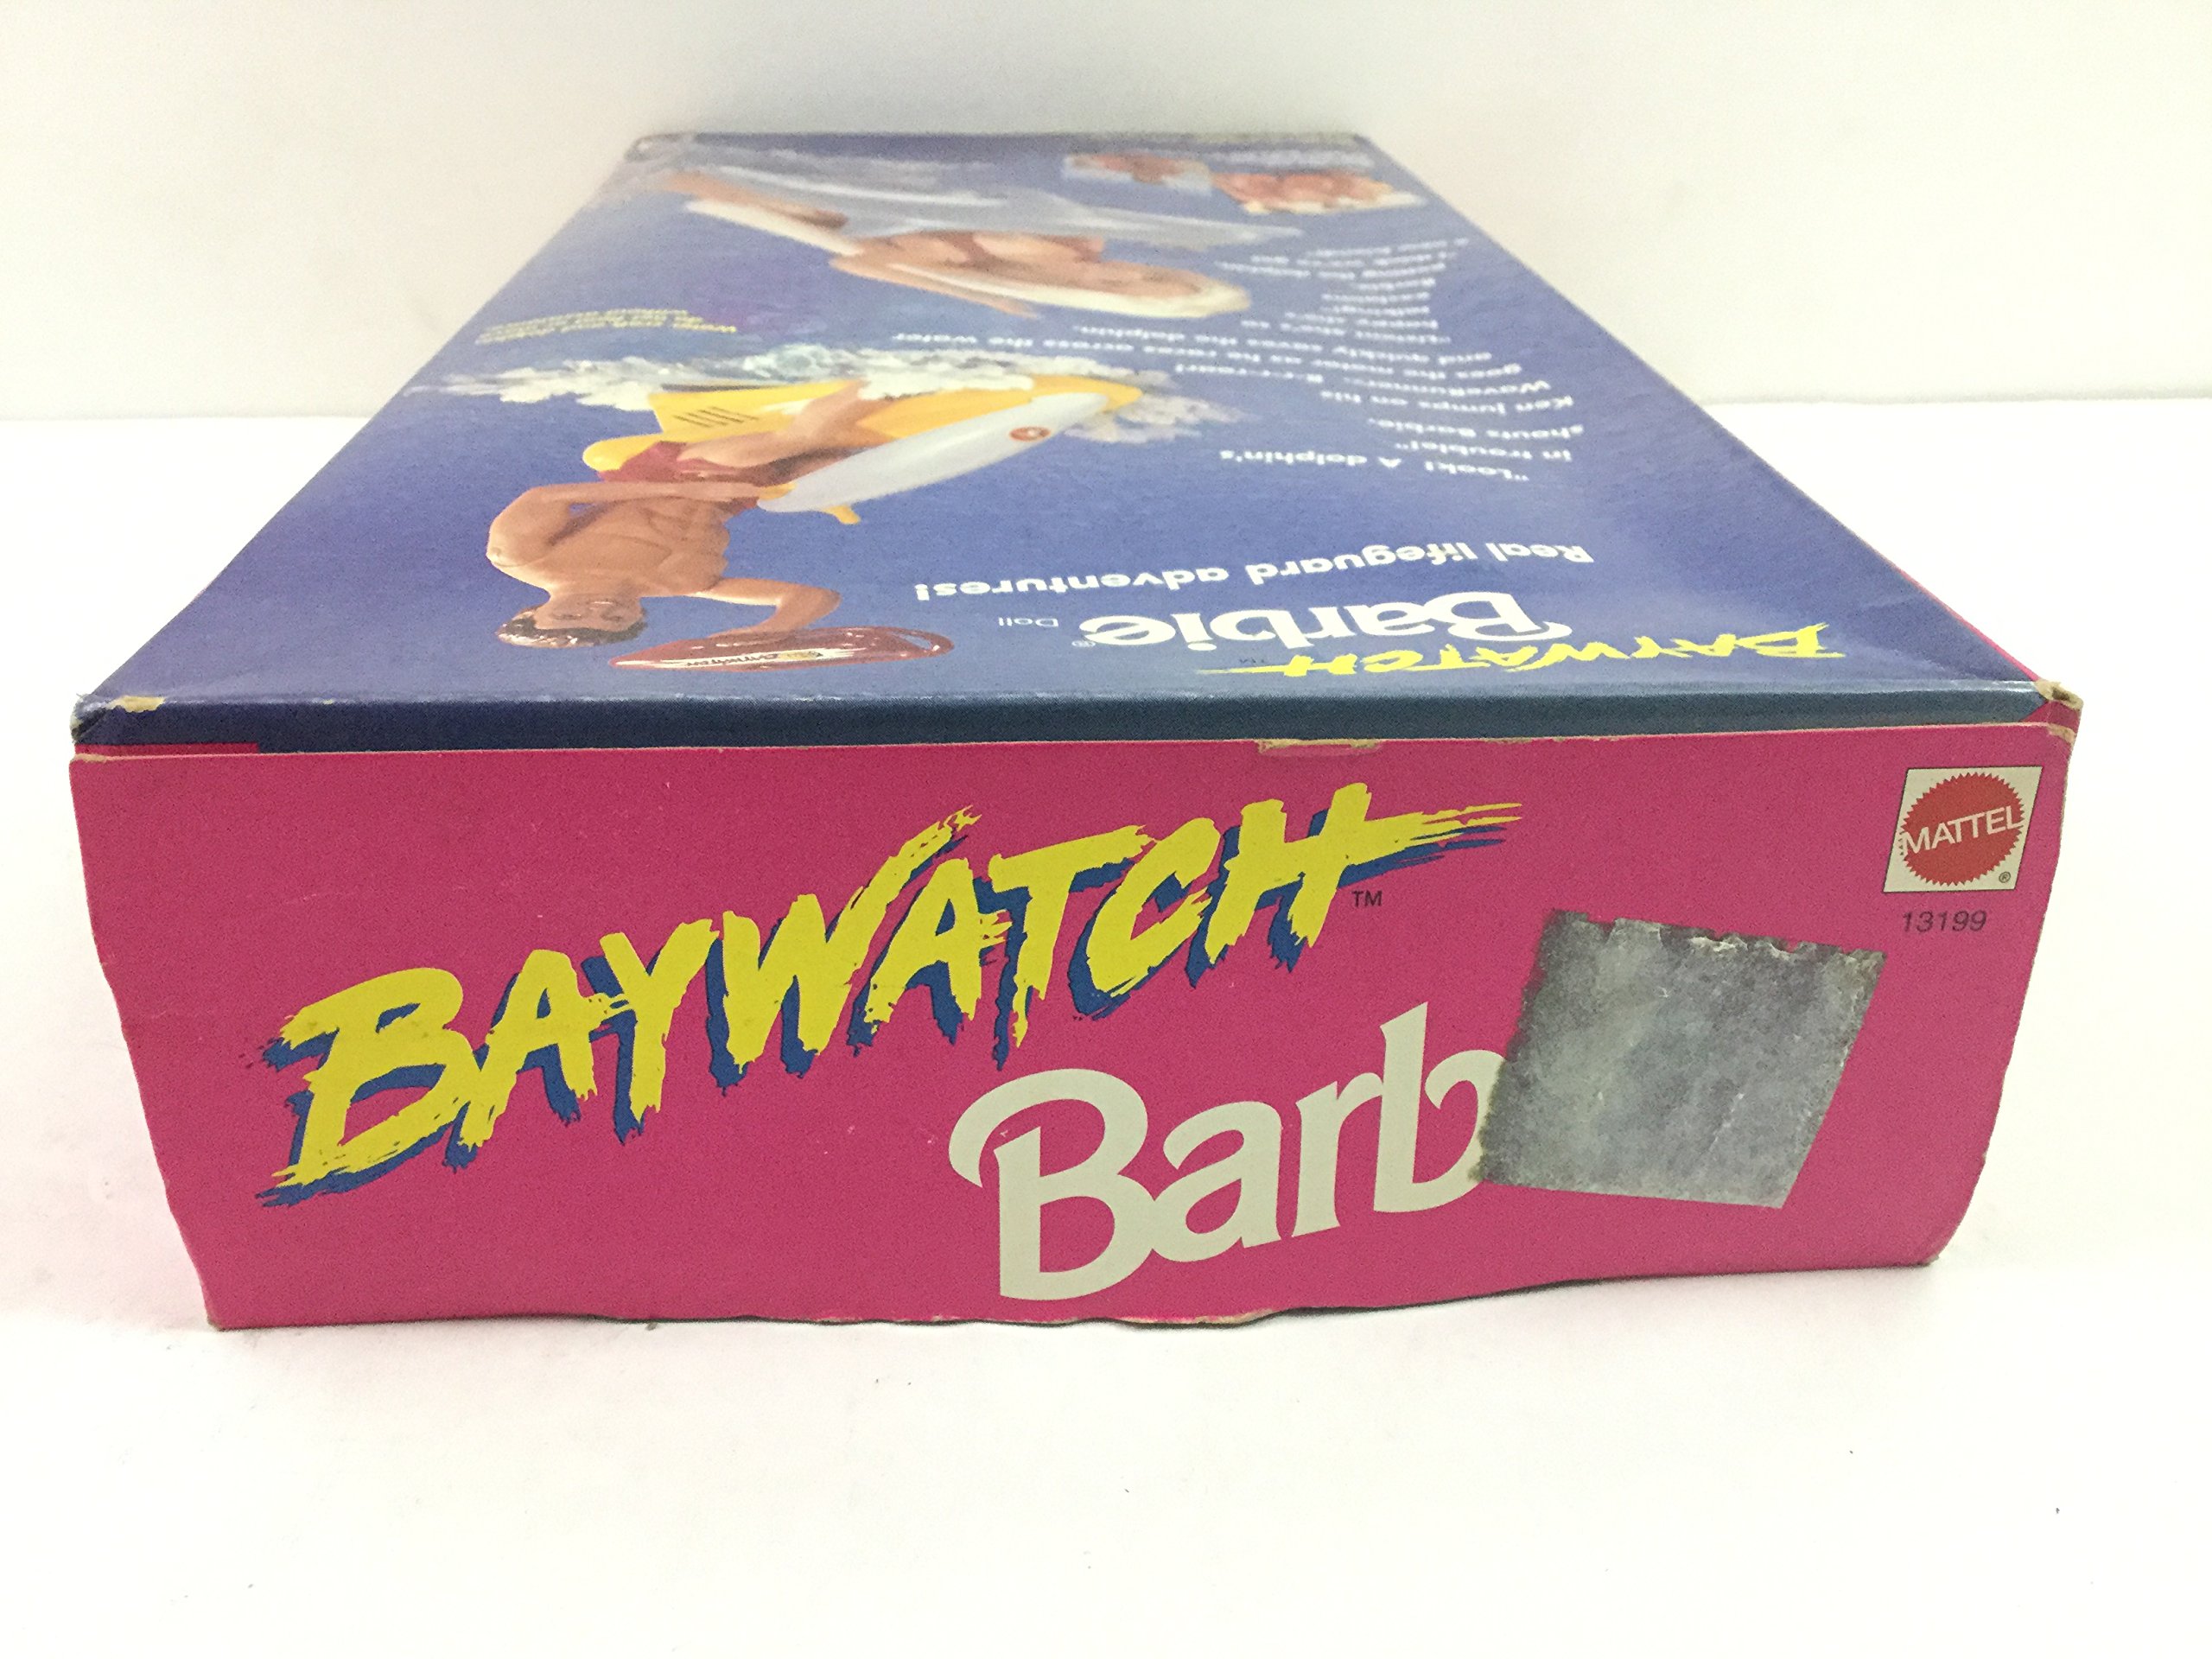 BAYWATCH BARBIE Doll with Dolphin & Accessories 1994